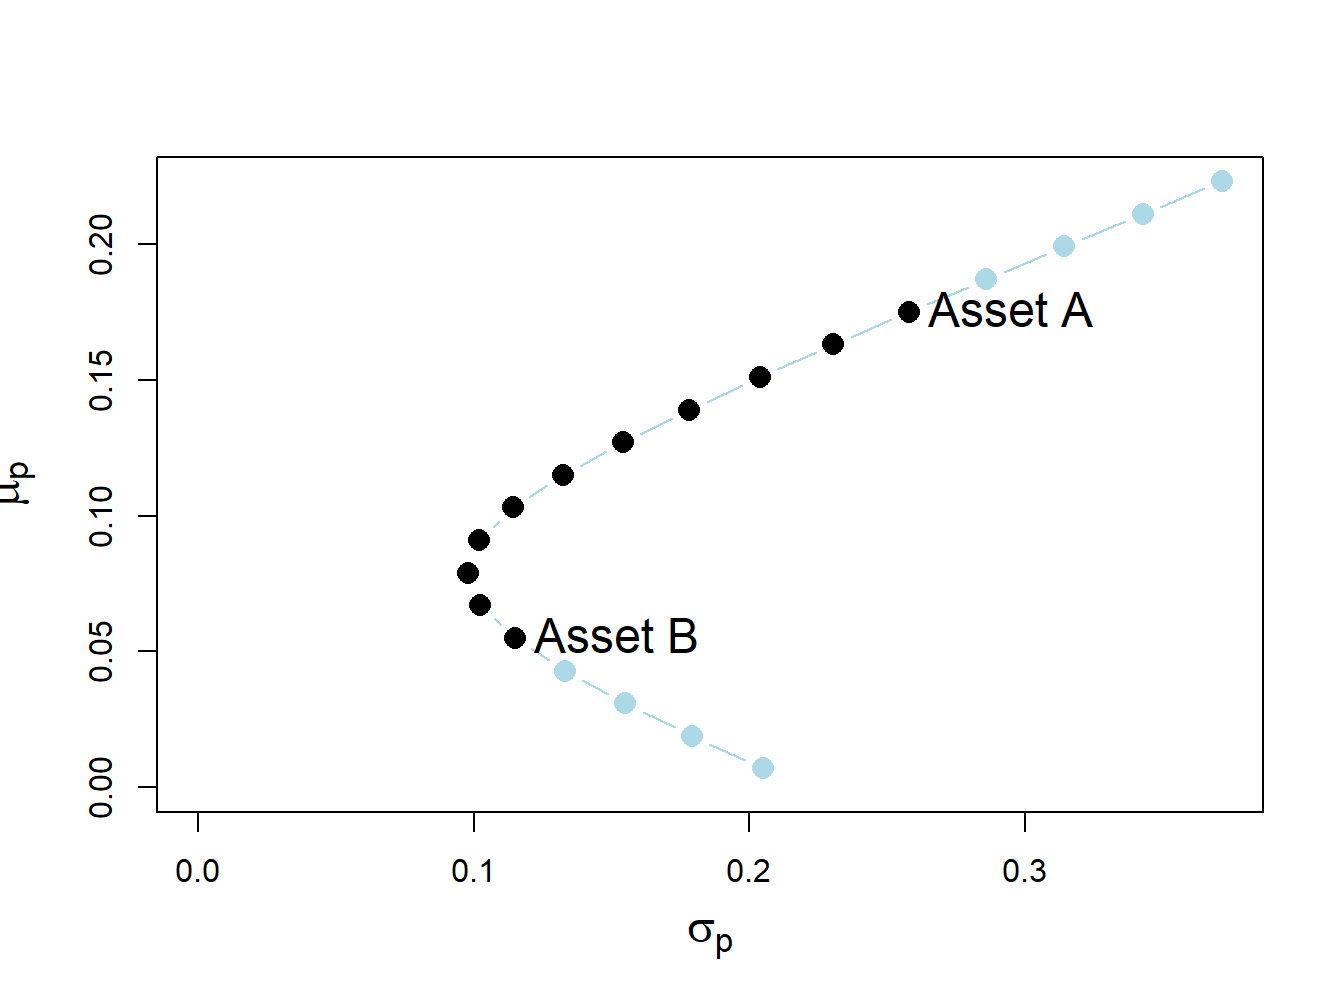 Two-risky asset portfolio frontier. Long-only portfolios are in black (between Asset B and Asset A), and long-short portfolios are in blue (below Asset B and above Asset A).